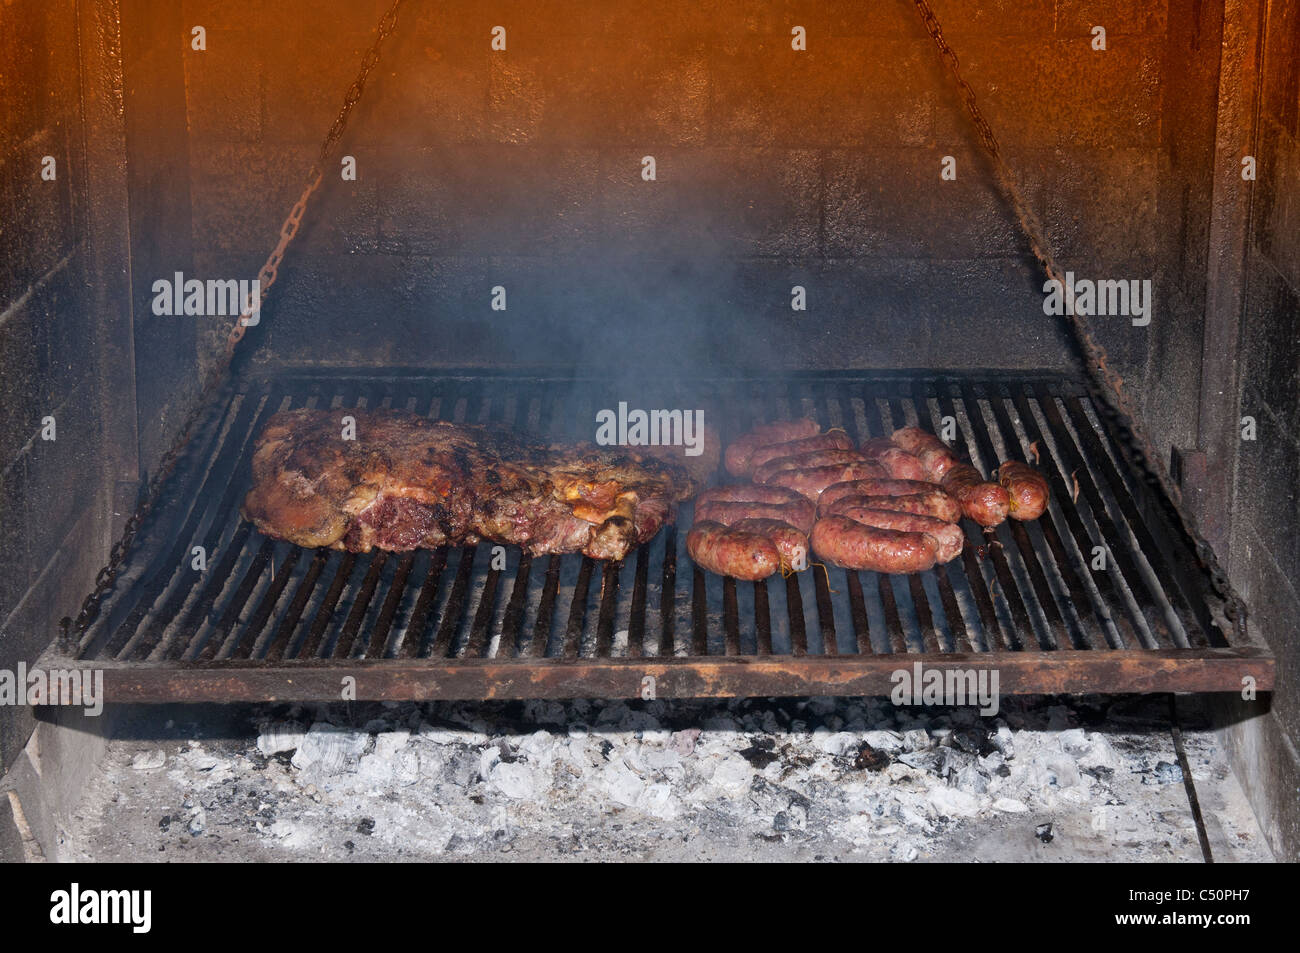 Argentinean Barbecue, Tigre, Buenos Aires, Argentina Stock Photo